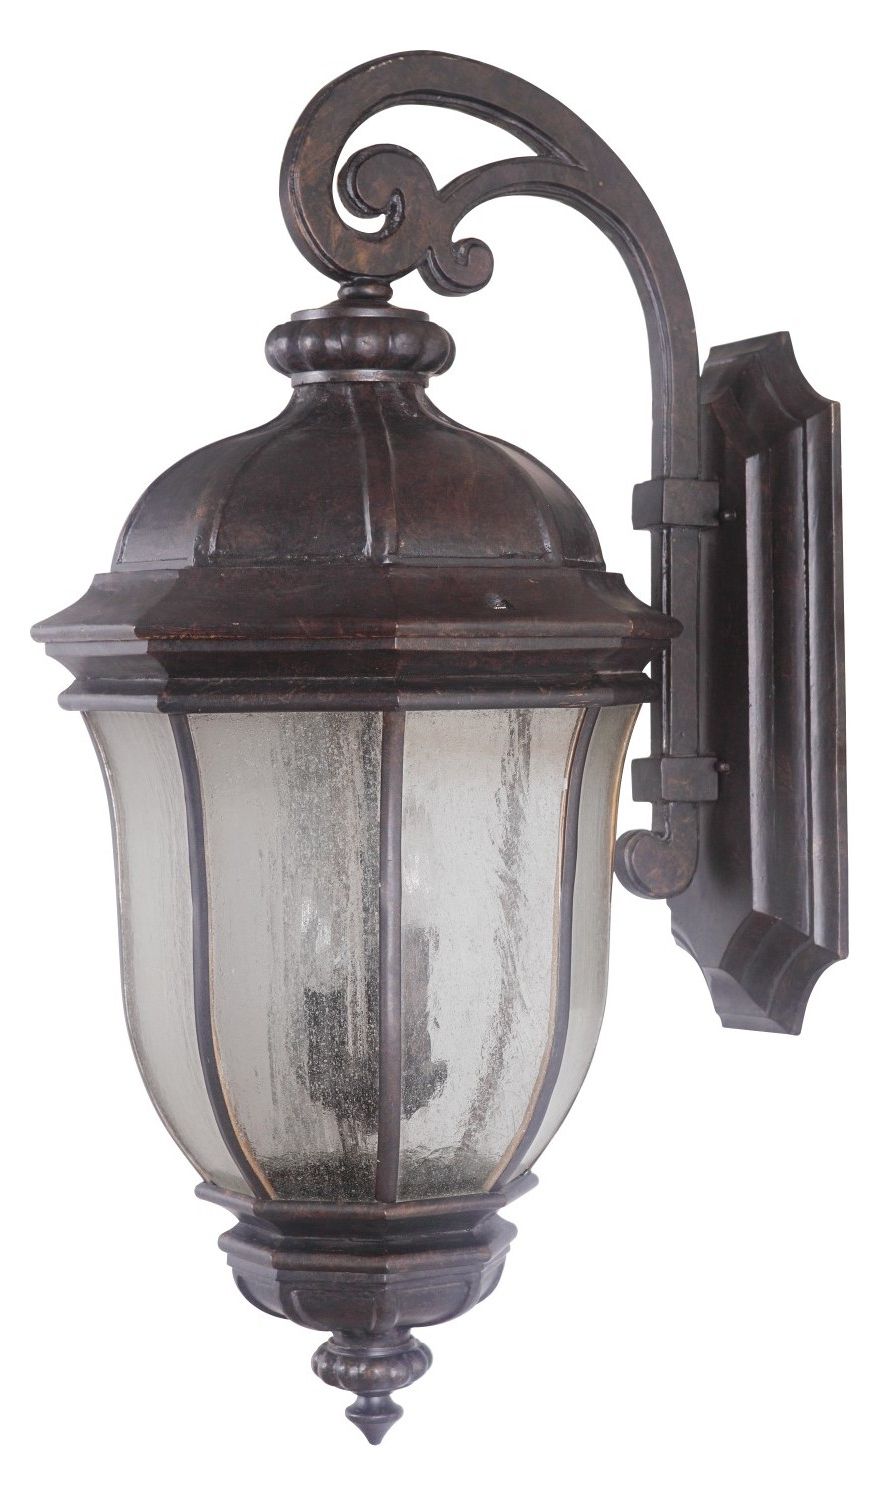 Tangier Dark Bronze Wall Lanterns For Most Recent Craftmade Wall Lantern With Seeded Glass Shades, Peruvian (View 17 of 20)